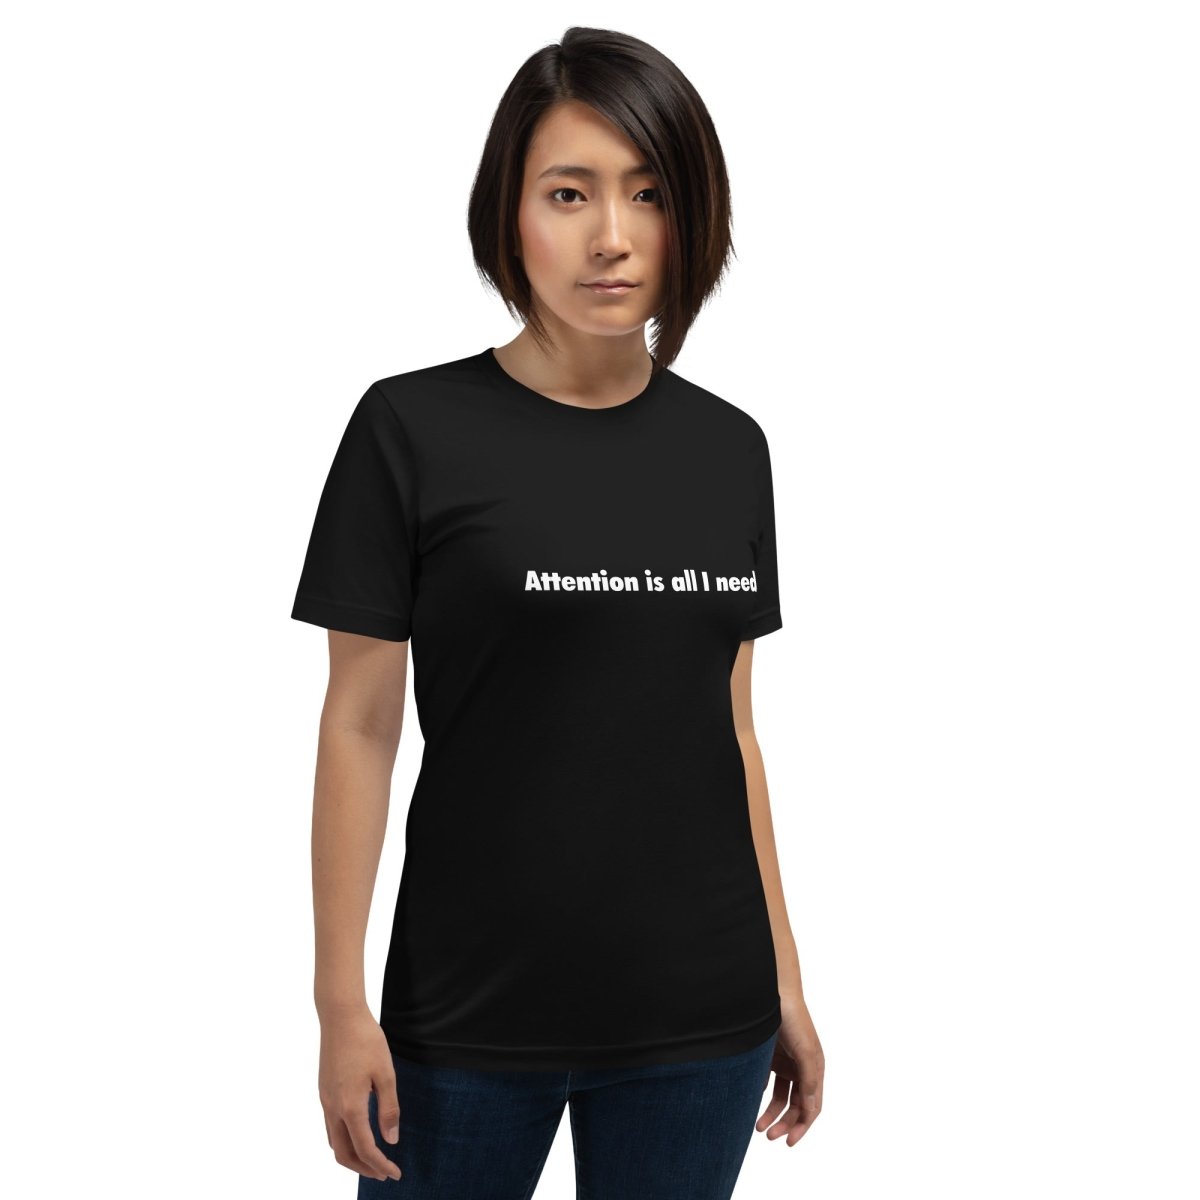 Attention is all I need. T - Shirt (unisex) - Black - AI Store